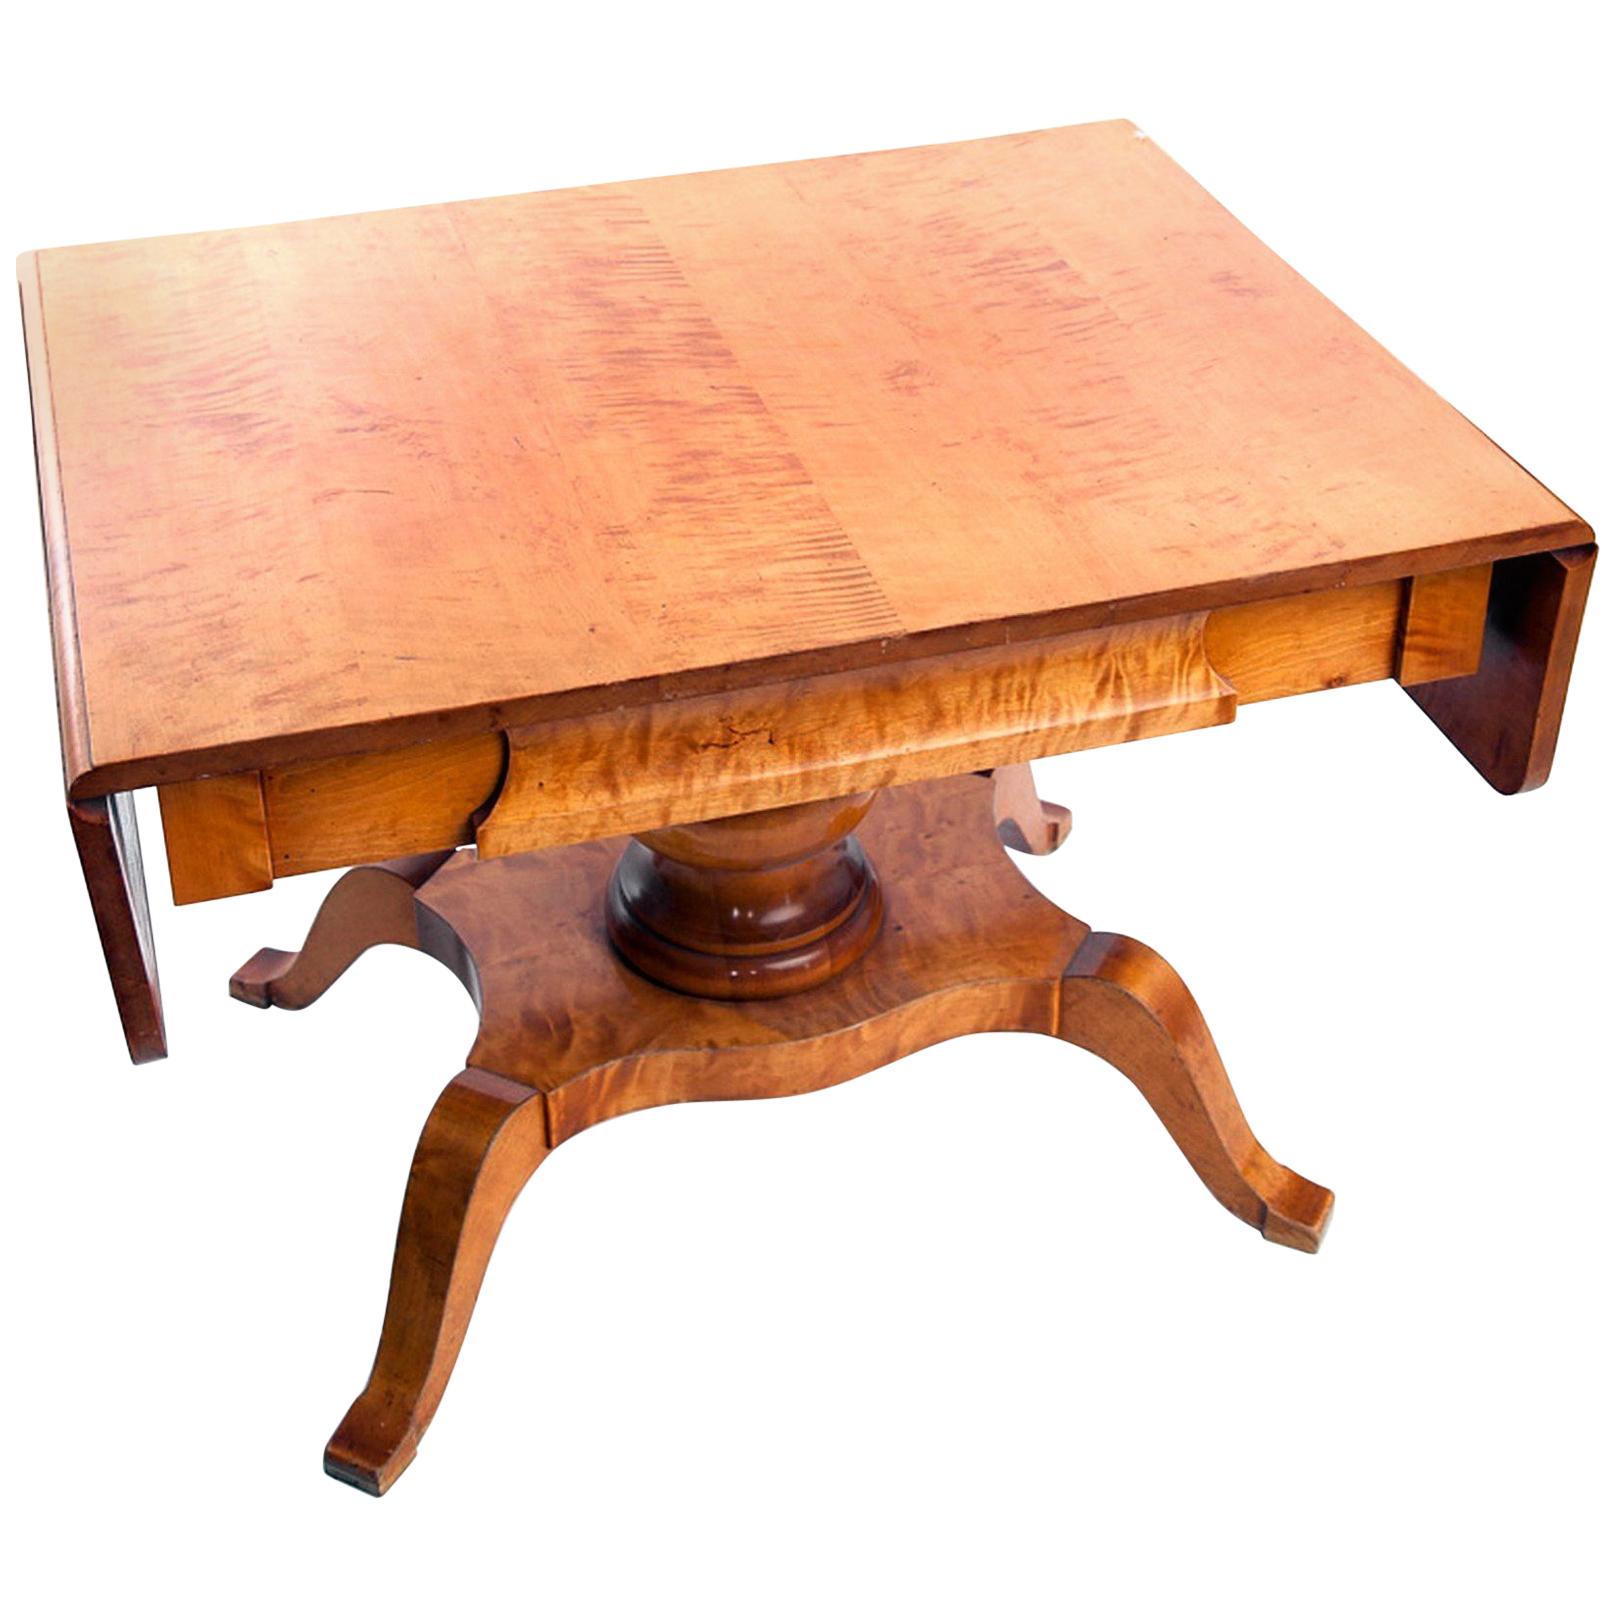 Swedish Empire Leaf Table in Birch from Early 1900s